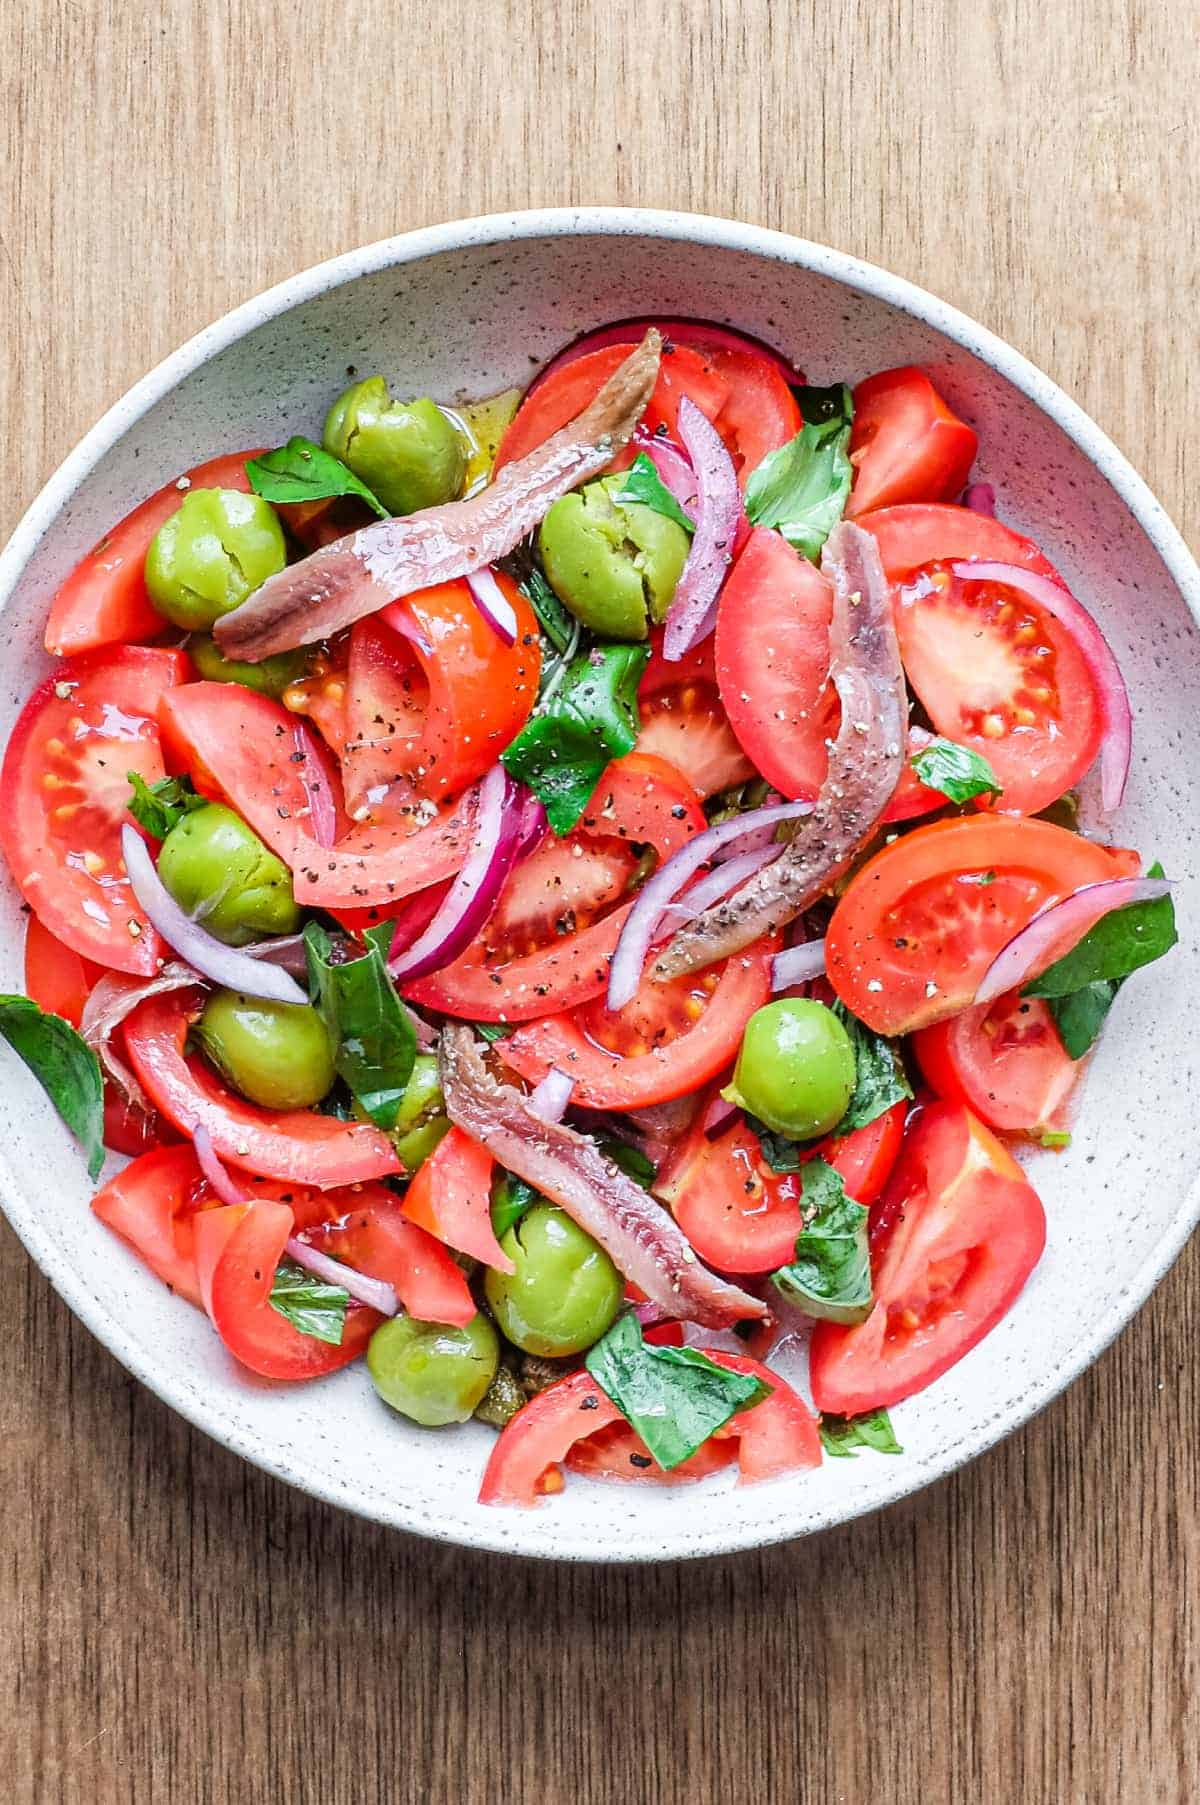 A bowl of Tomato salad with olives, capers, red onion, anchovies and fresh basil.